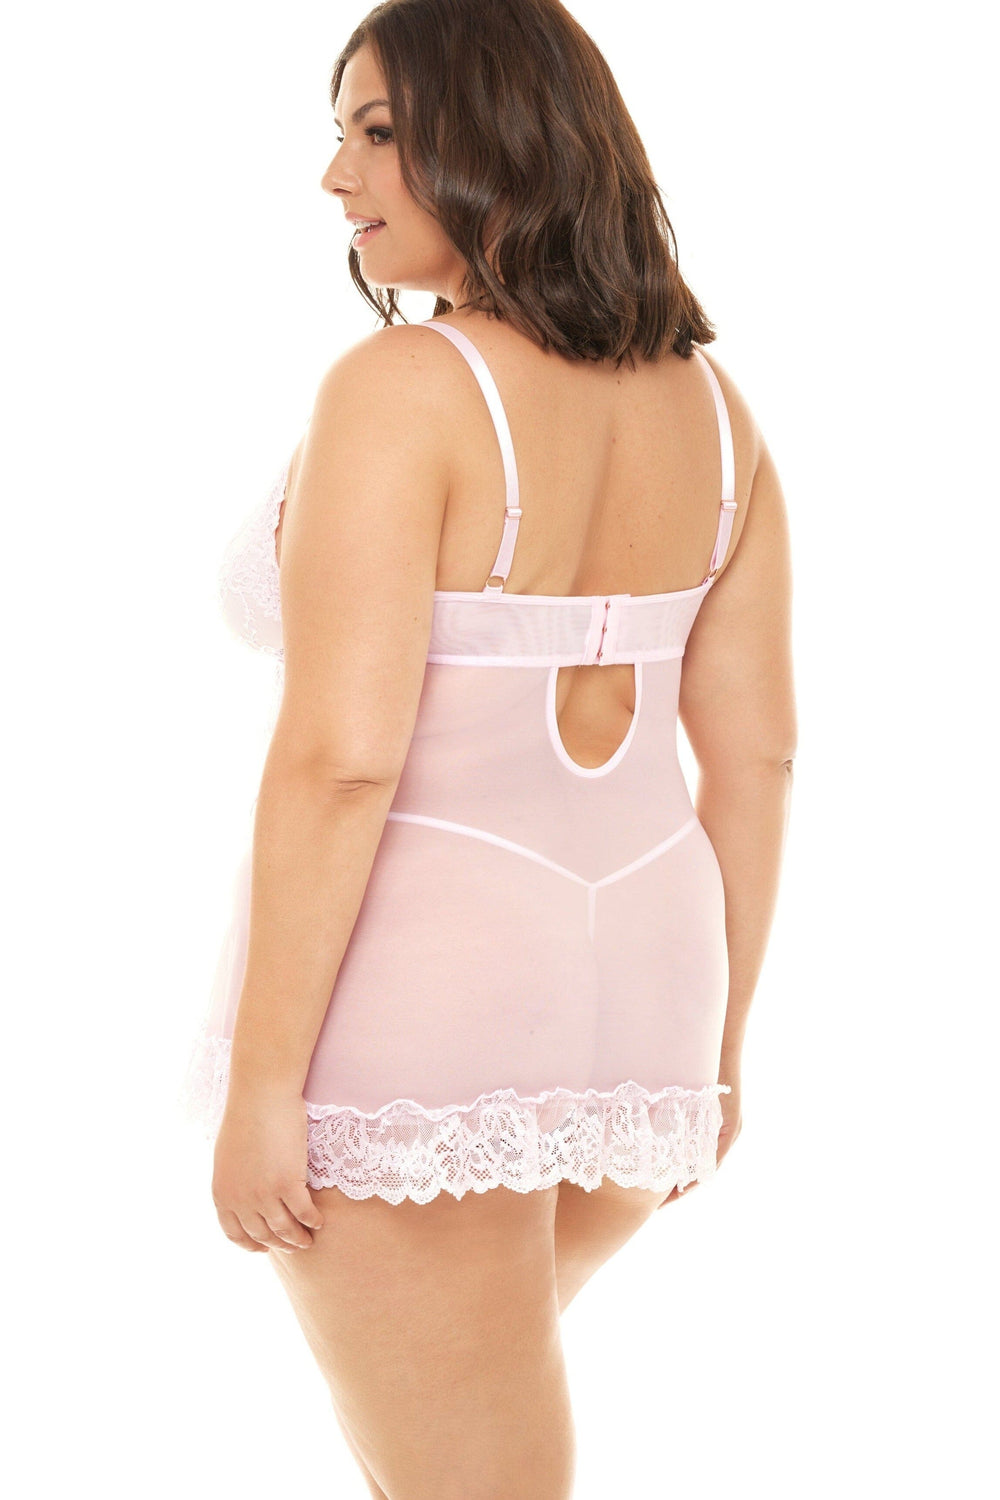 Soft Cup Lacey Babydoll With Bows And G-String-Babydolls-Oh La La Cheri-SEXYSHOES.COM